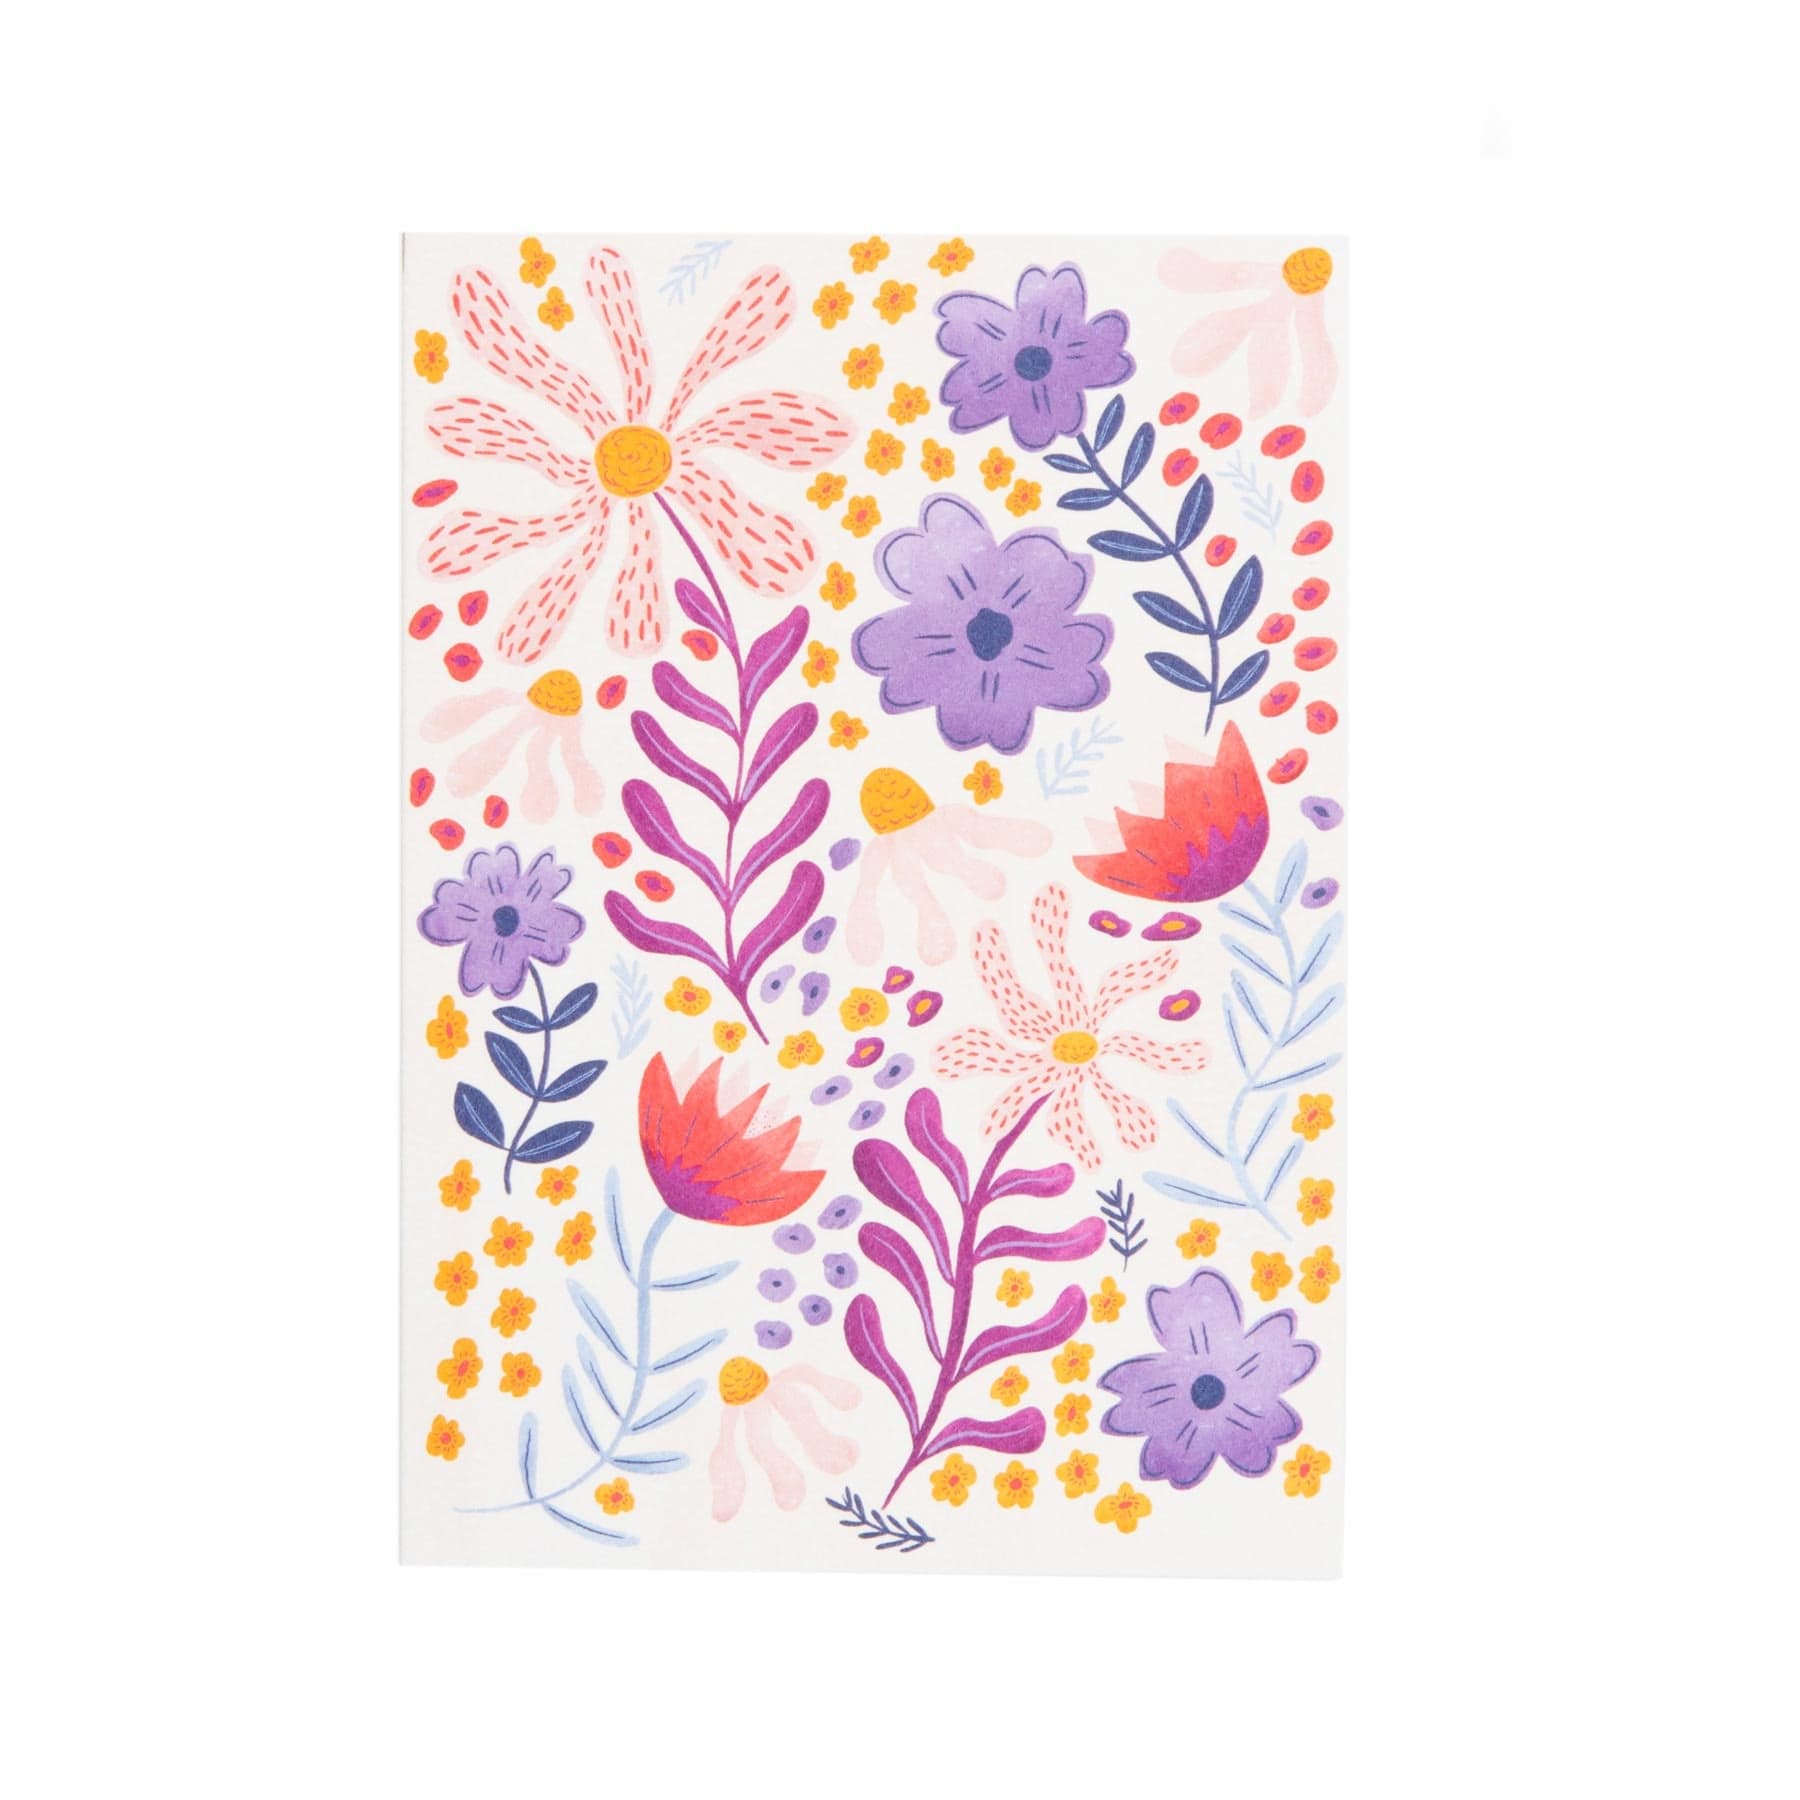 Wildflower illustrated card